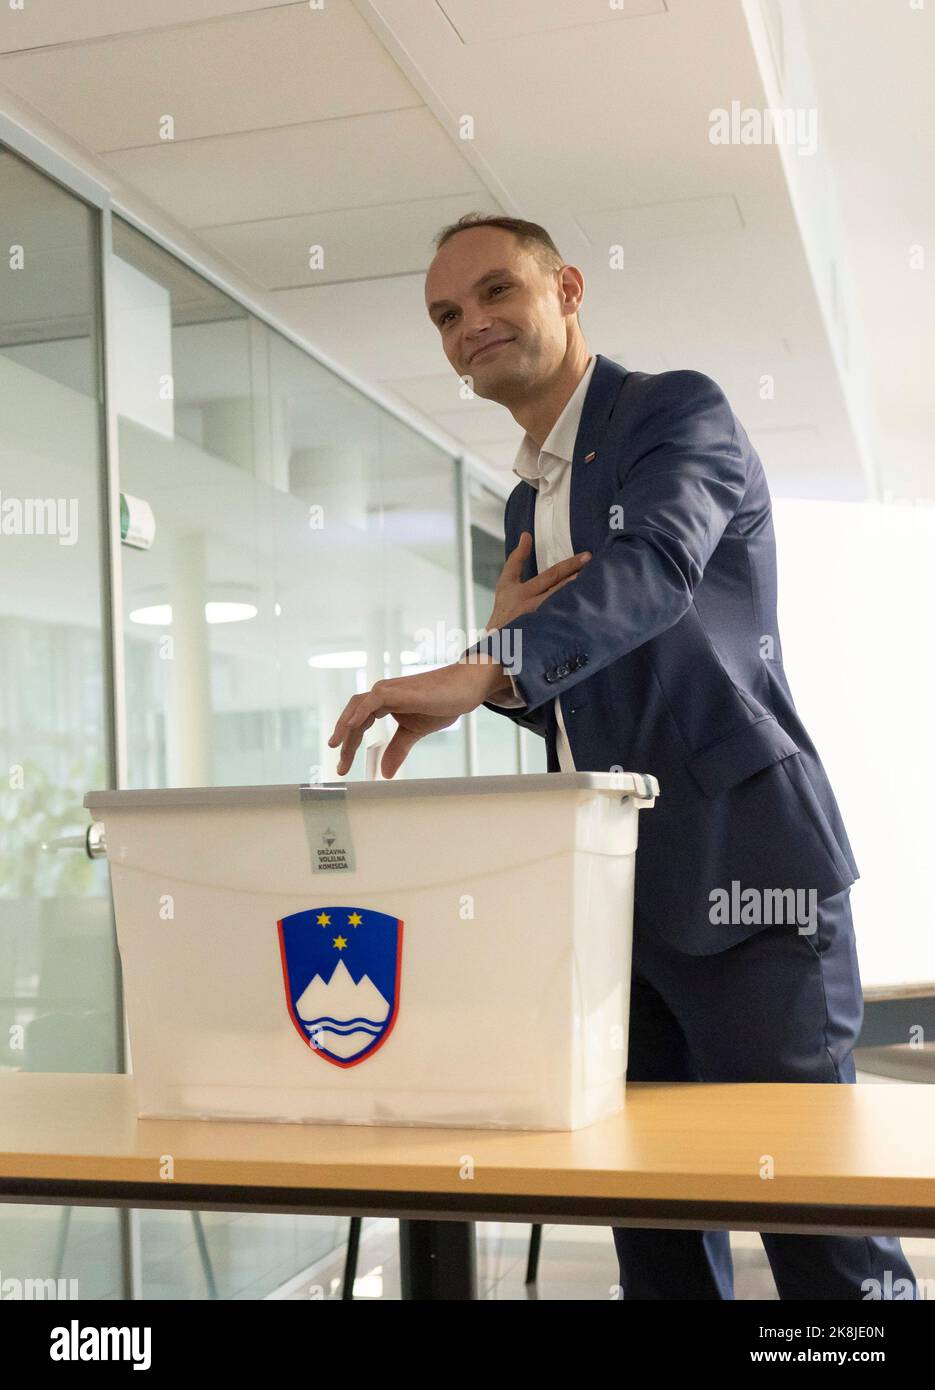 Ljubljana, Slovenia. 23rd Oct, 2022. Presidential candidate Anze Logar casts ballot during the presidential election at a polling station in Ljubljana, Slovenia, Oct. 23, 2022. Slovenia is due to hold the second round of presidential election on Nov. 13 after no candidate got majority in the first round held on Sunday. Credit: Zeljko Stevanic/Xinhua/Alamy Live News Stock Photo